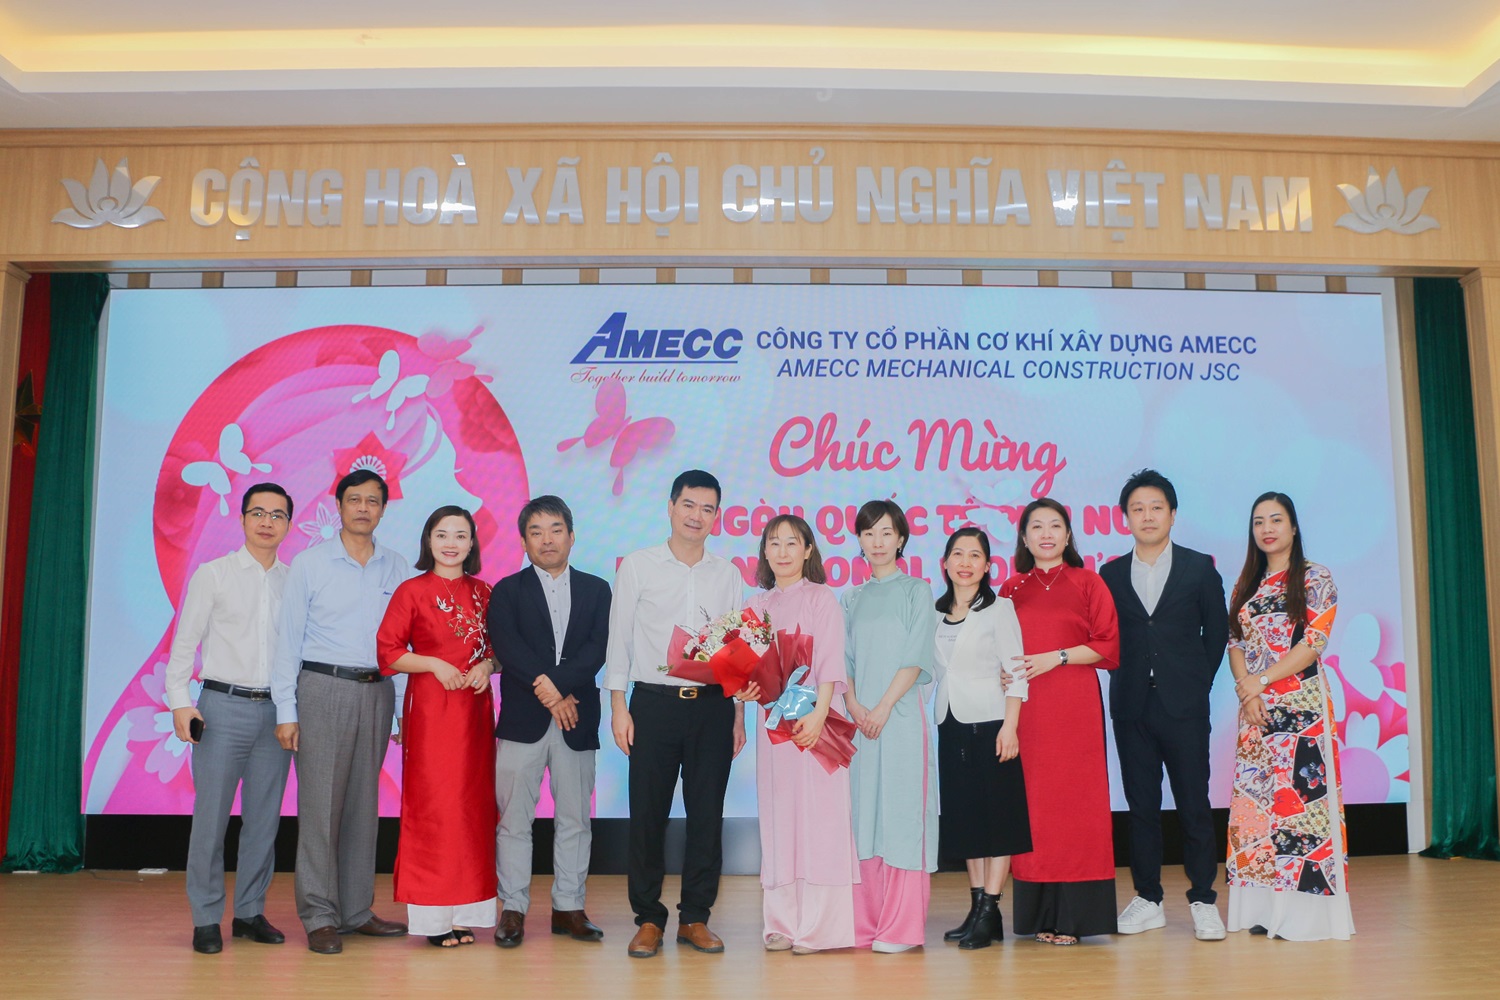 Welcome to International Women's Day at Amecc Company: Honoring the Contributions of Women